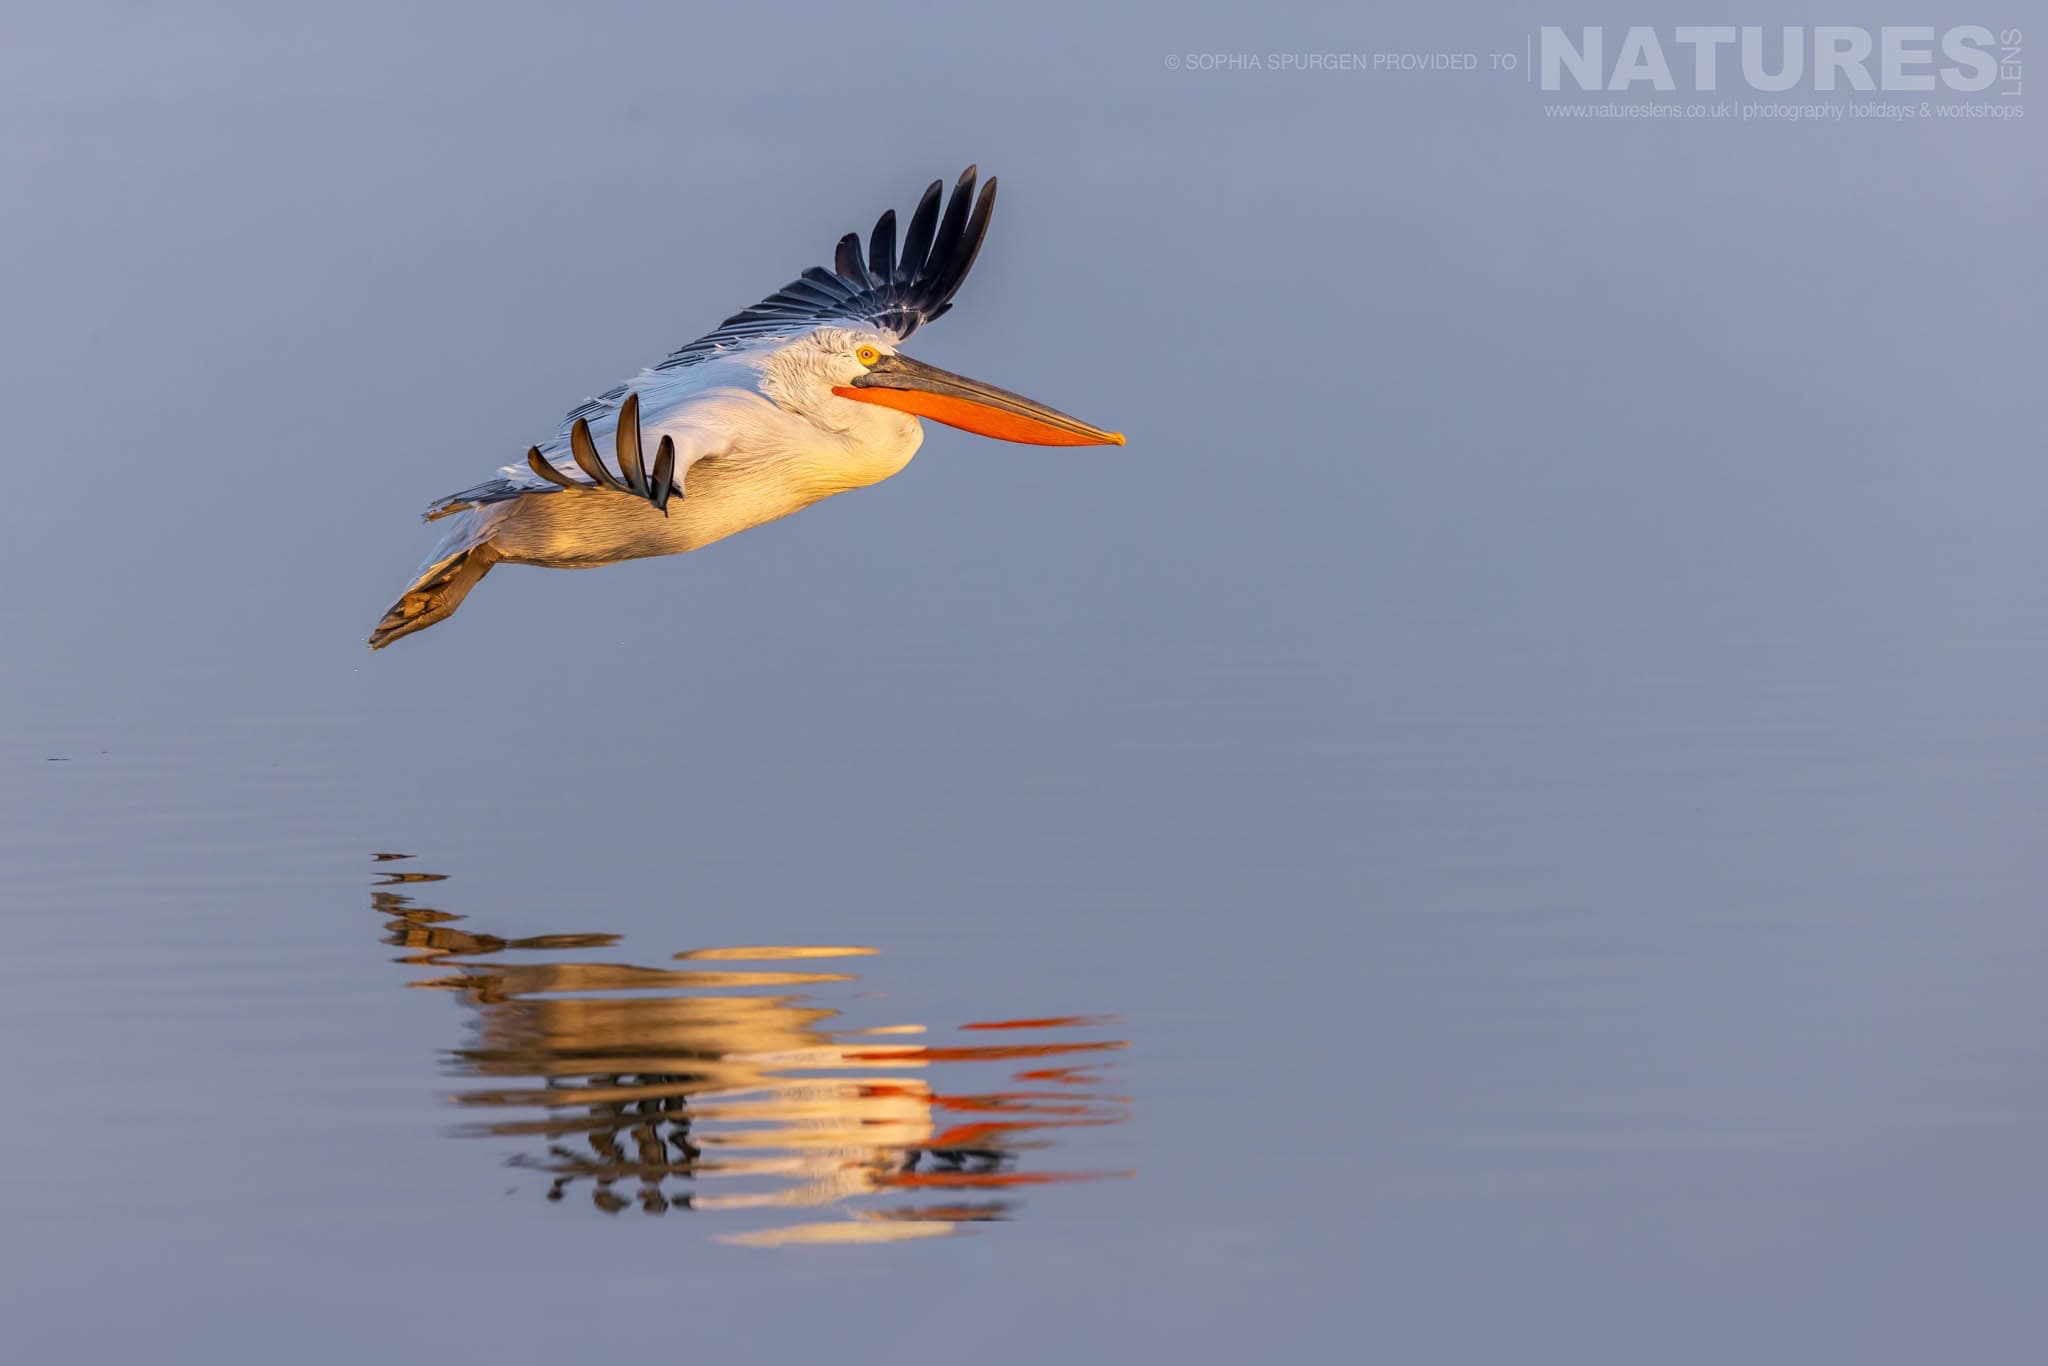 One Of The Dalmatian Pelicans Of Greece Gliding Above The Waters Of Lake Kerkini